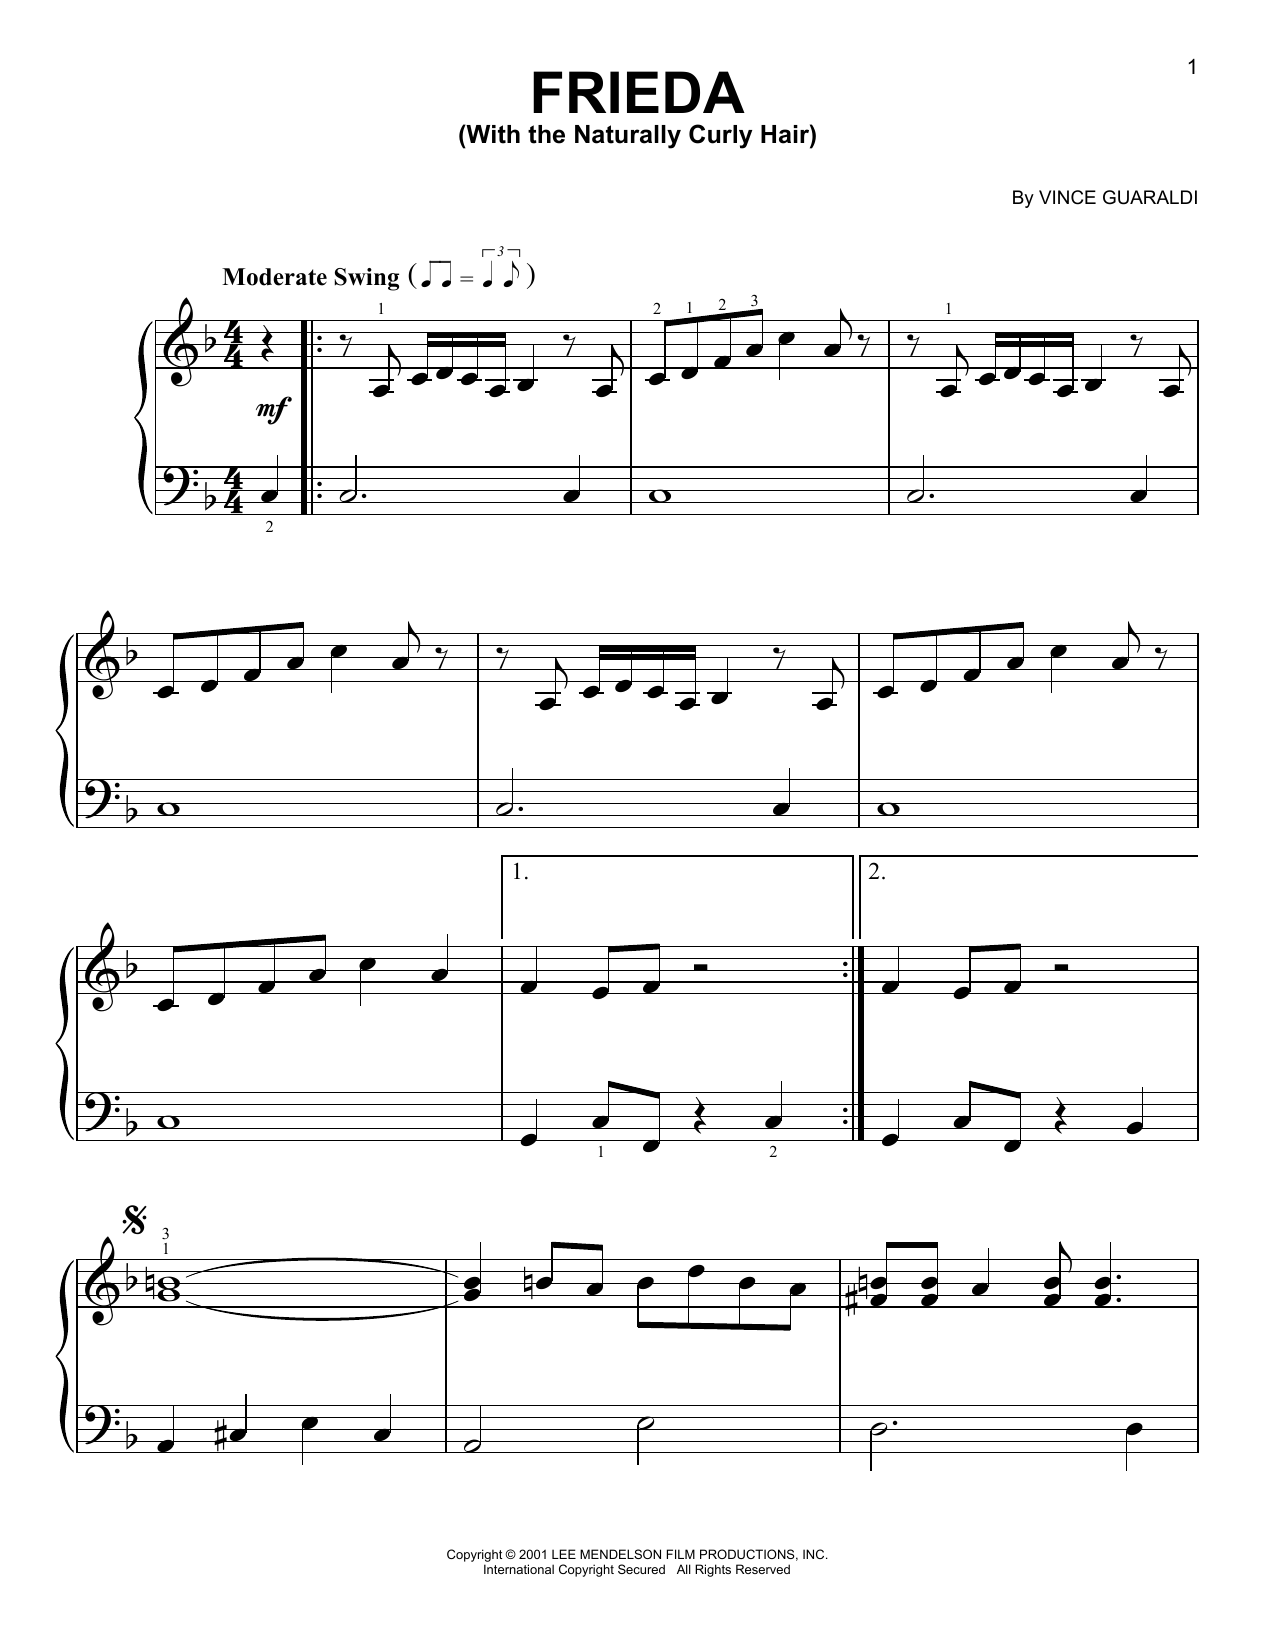 Download Vince Guaraldi Frieda (With The Naturally Curly Hair) Sheet Music